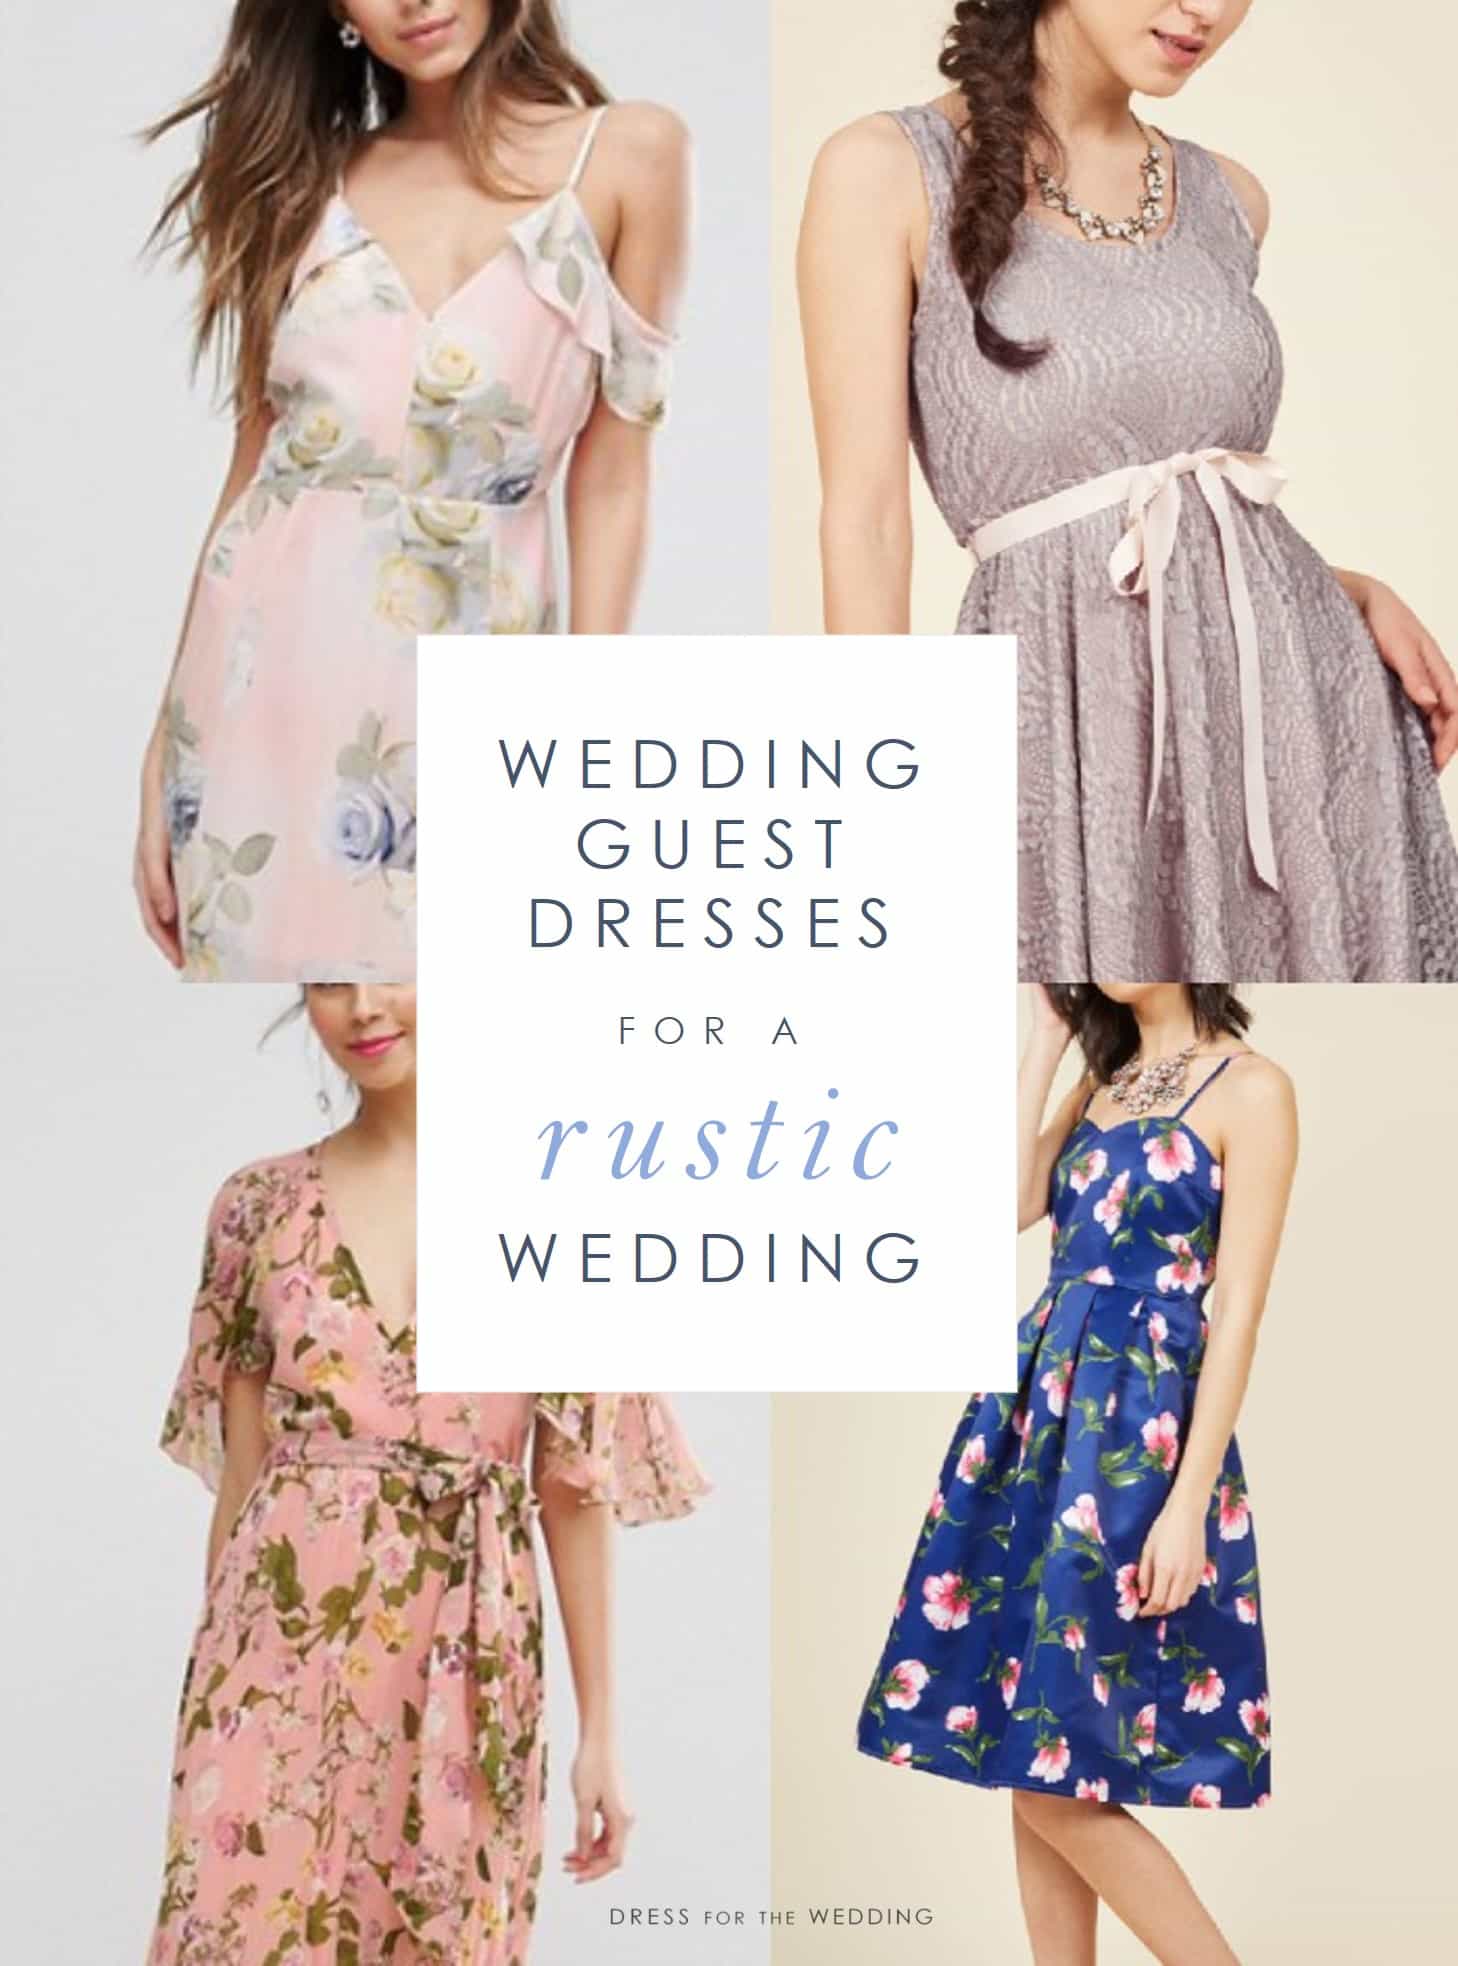 What Should a Guest Wear to a Rustic Wedding?